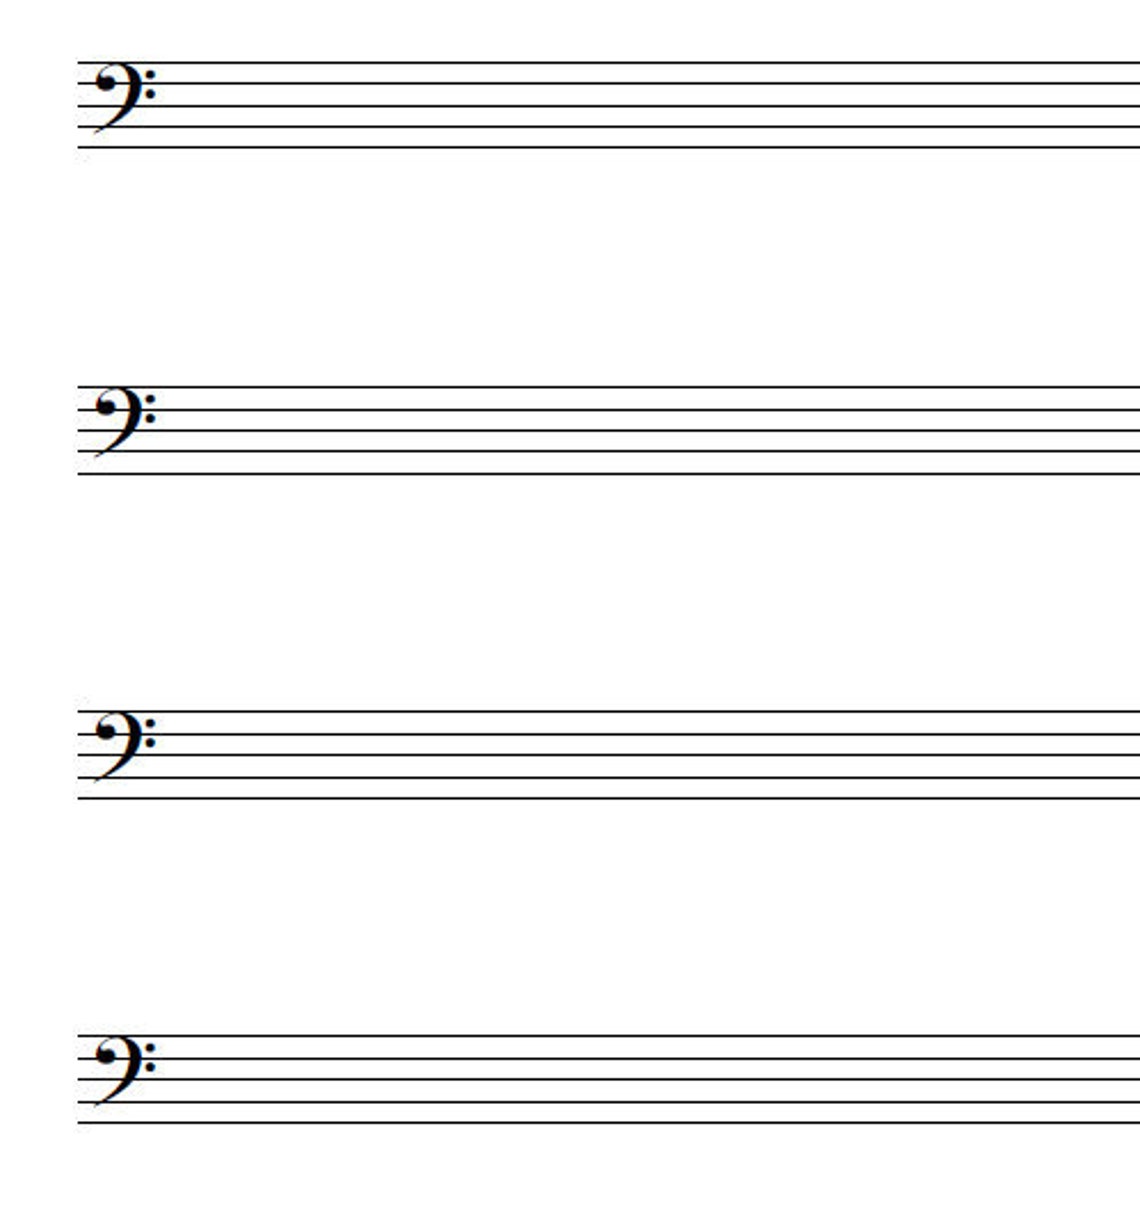 a4-music-blank-sheet-bass-clef-8-and-12-staves-printable-etsy